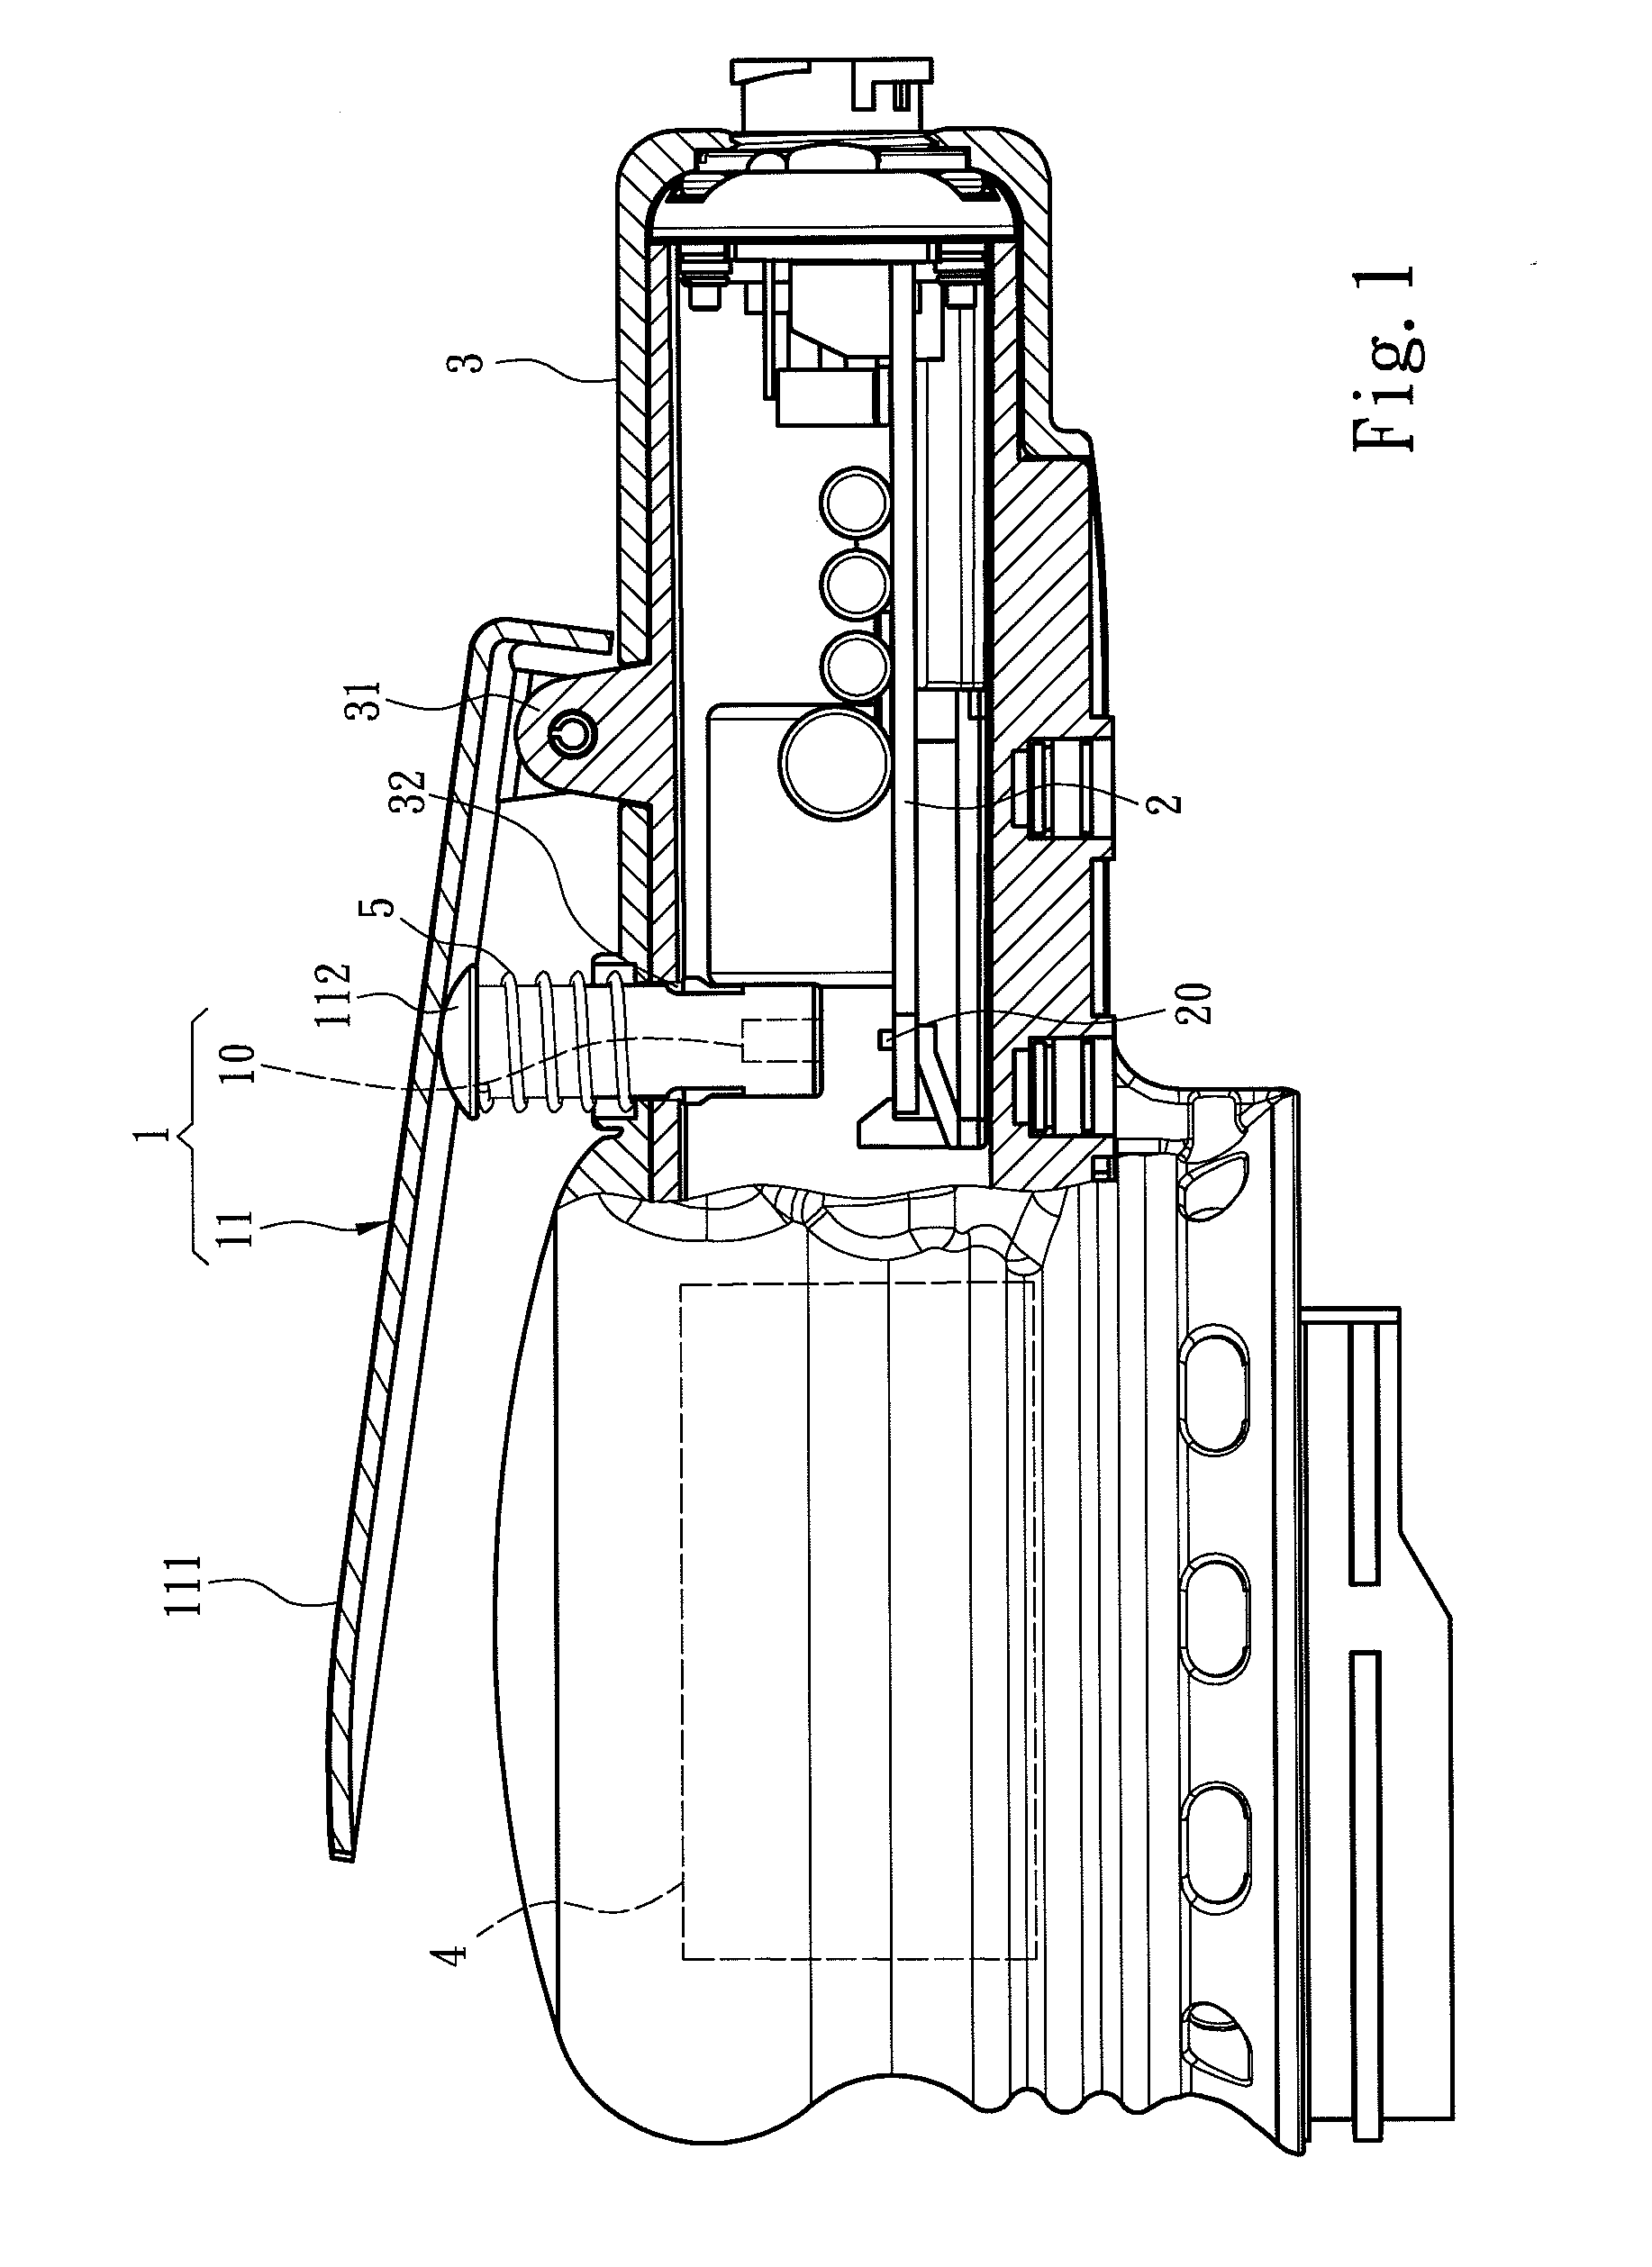 Power control structure for electric power tools